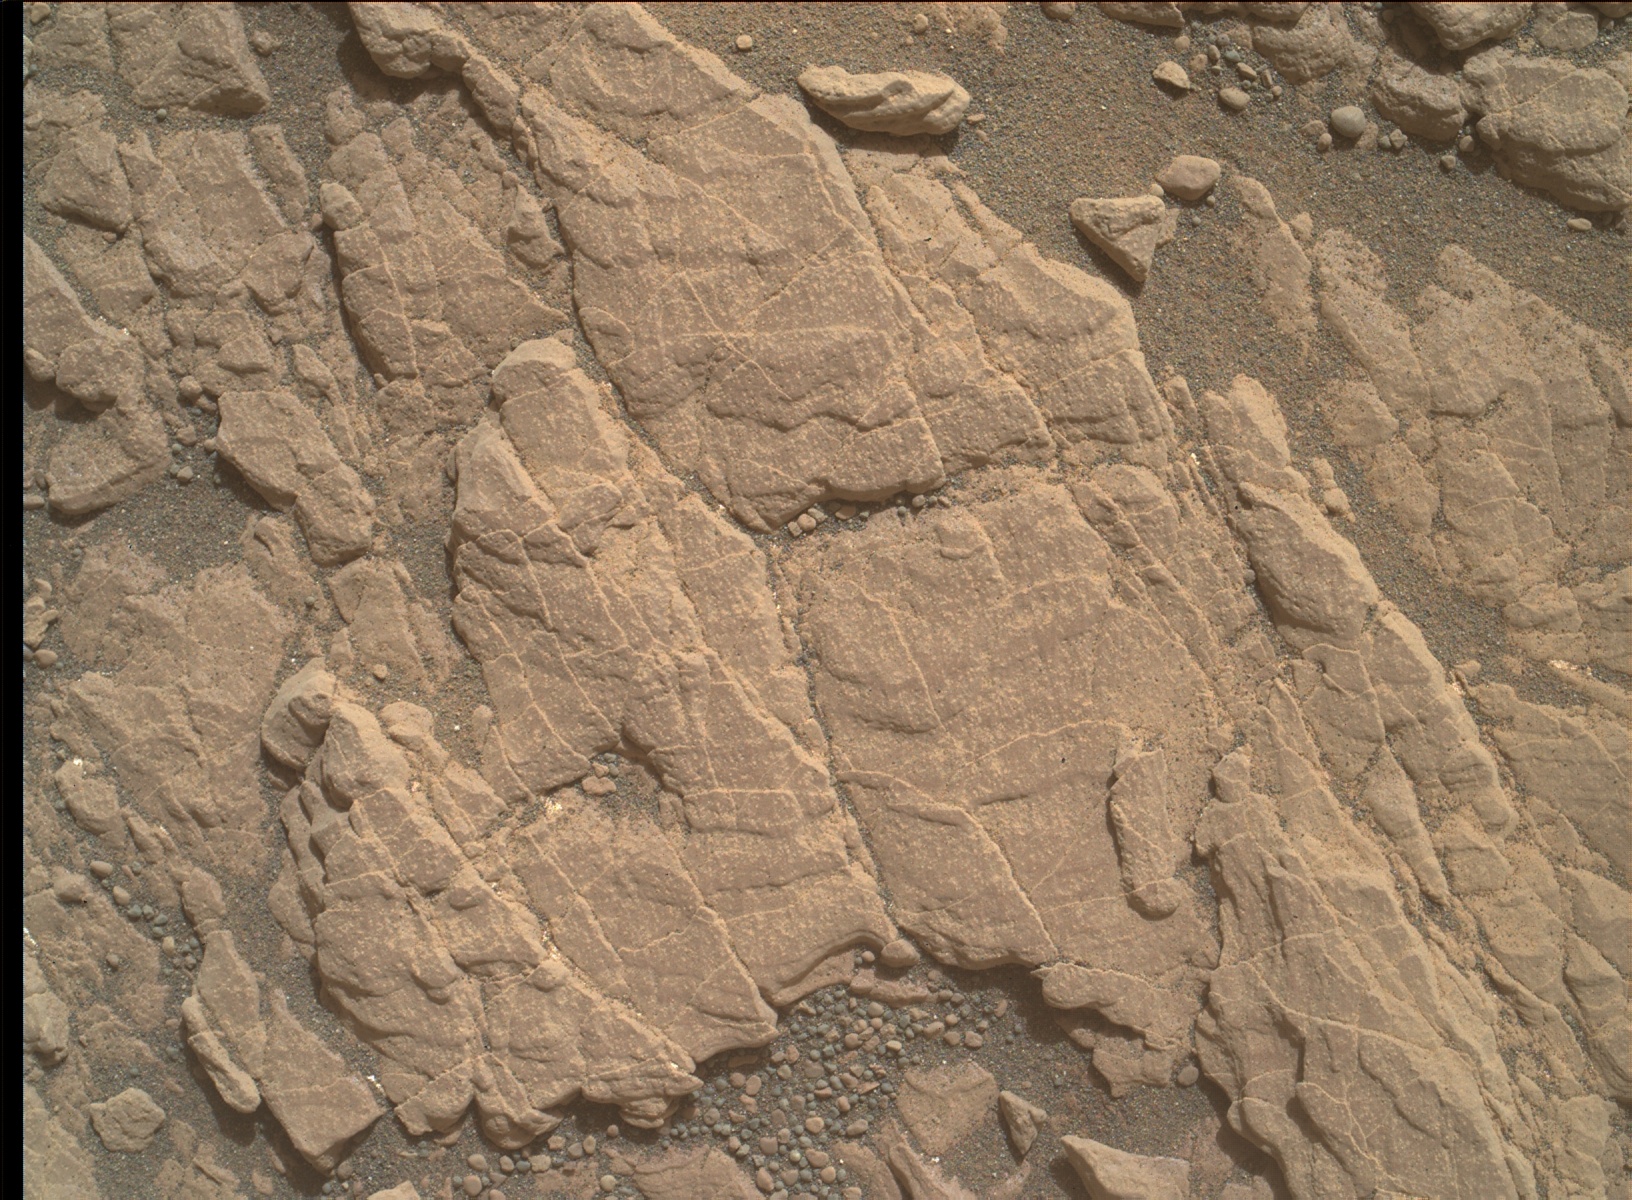 Nasa's Mars rover Curiosity acquired this image using its Mars Hand Lens Imager (MAHLI) on Sol 2369